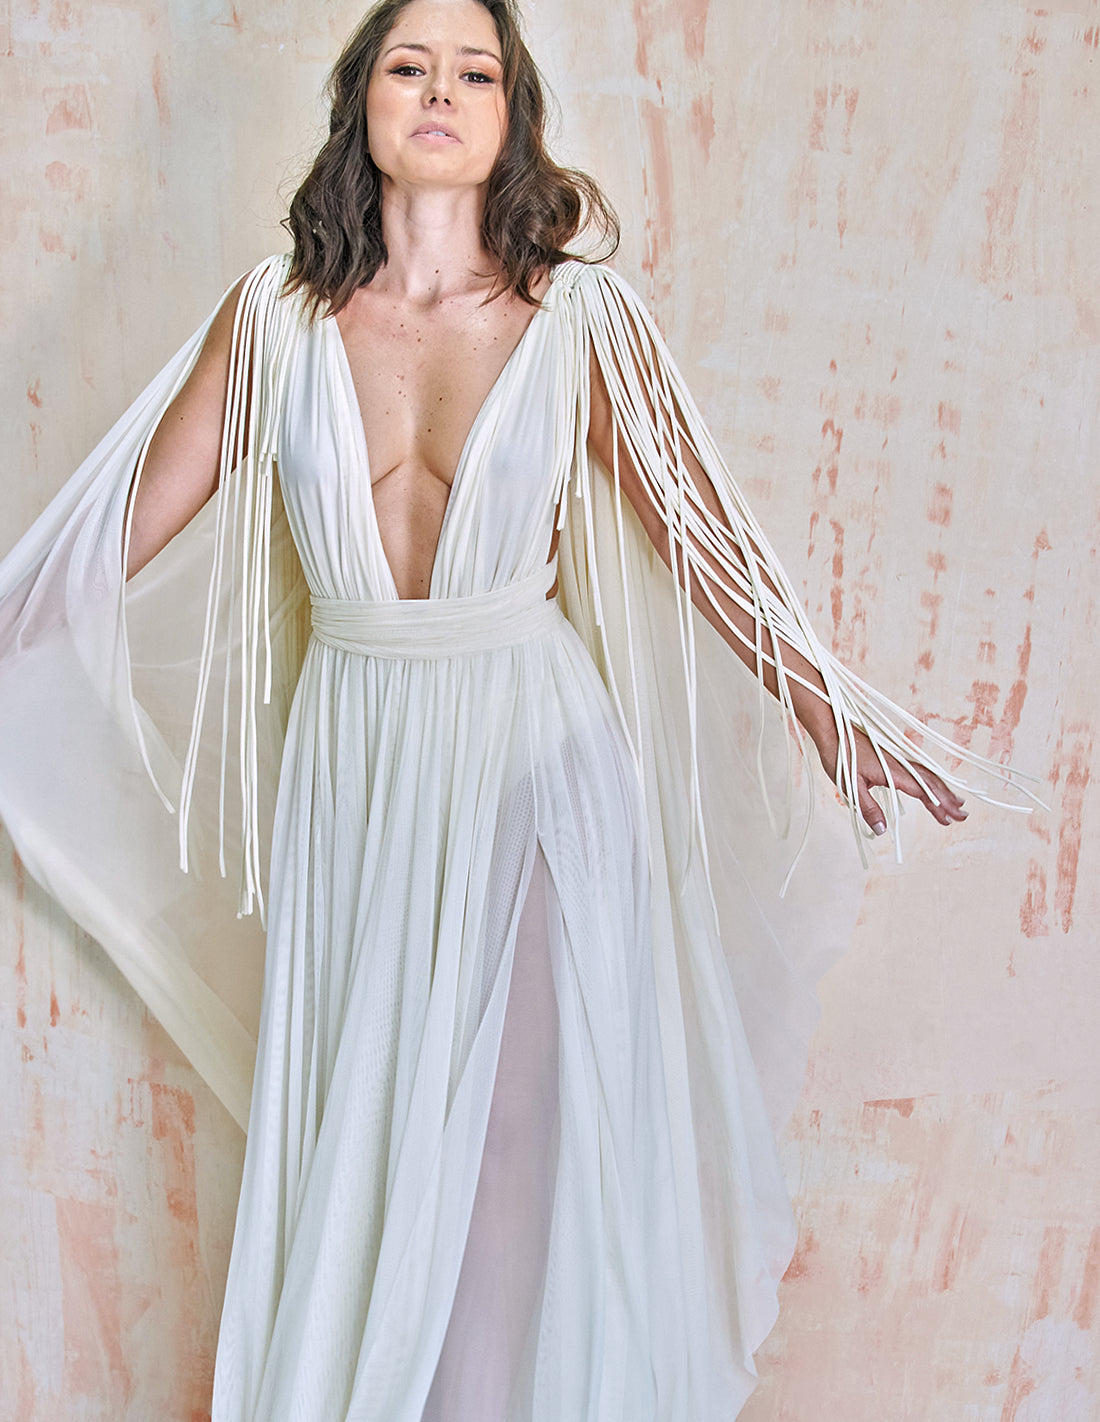 Sublime Cape Ivory. Cape With Hand Woven Macramé In Ivory. Entreaguas